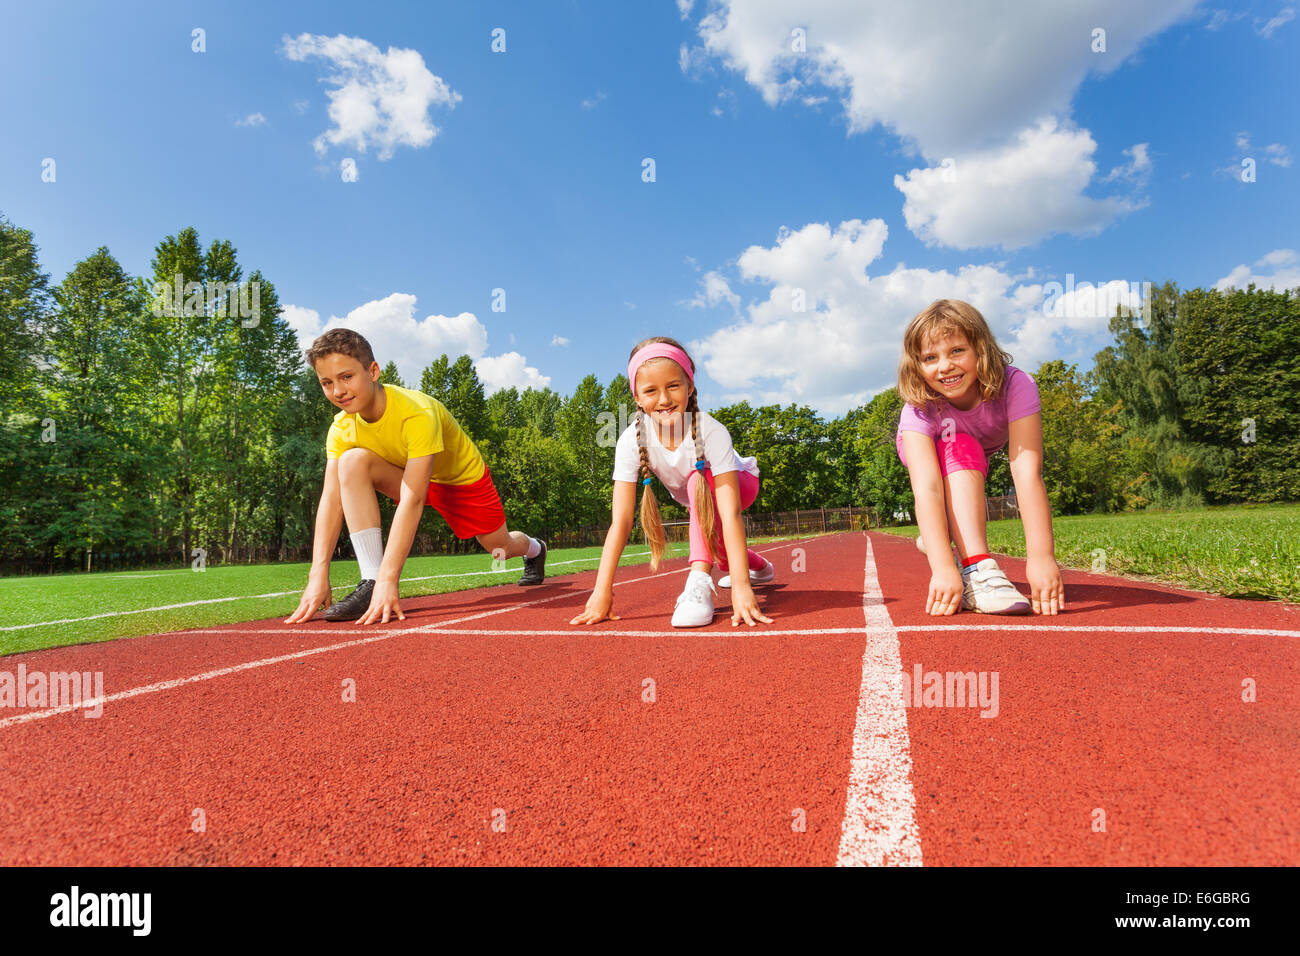 Smiling children in ready position to run Stock Photo